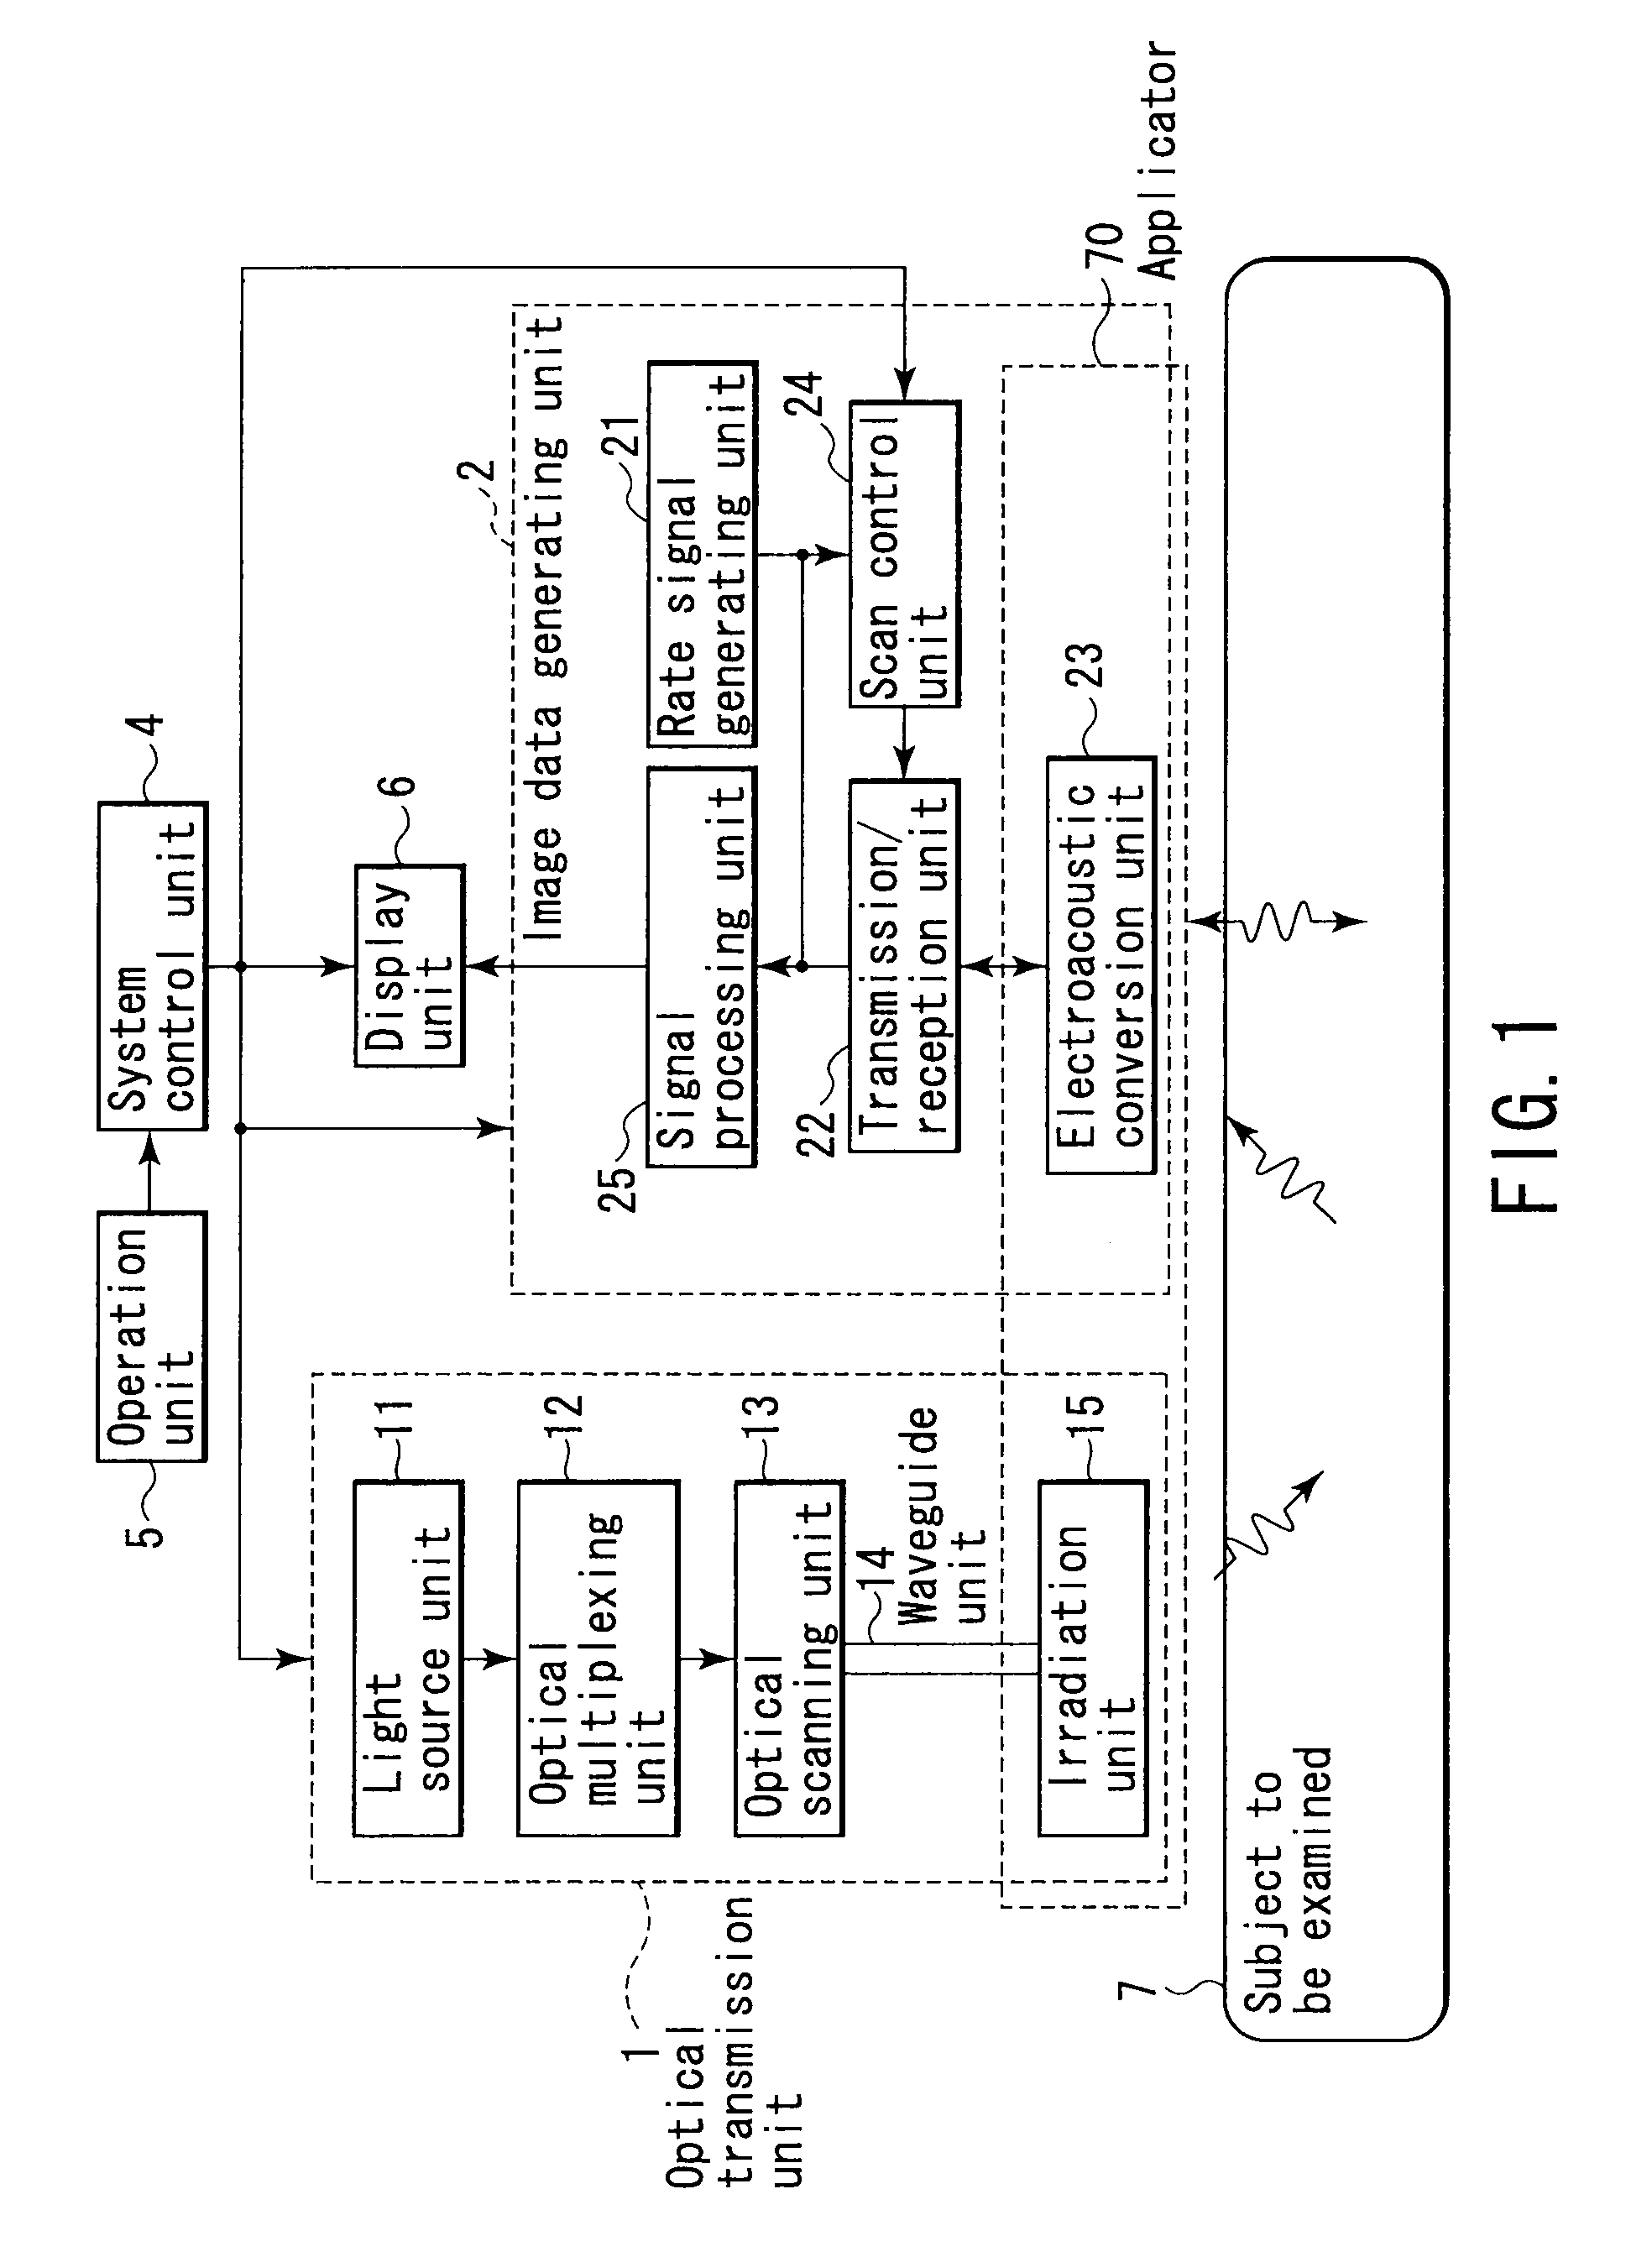 Non-invasive subject-information imaging method and apparatus